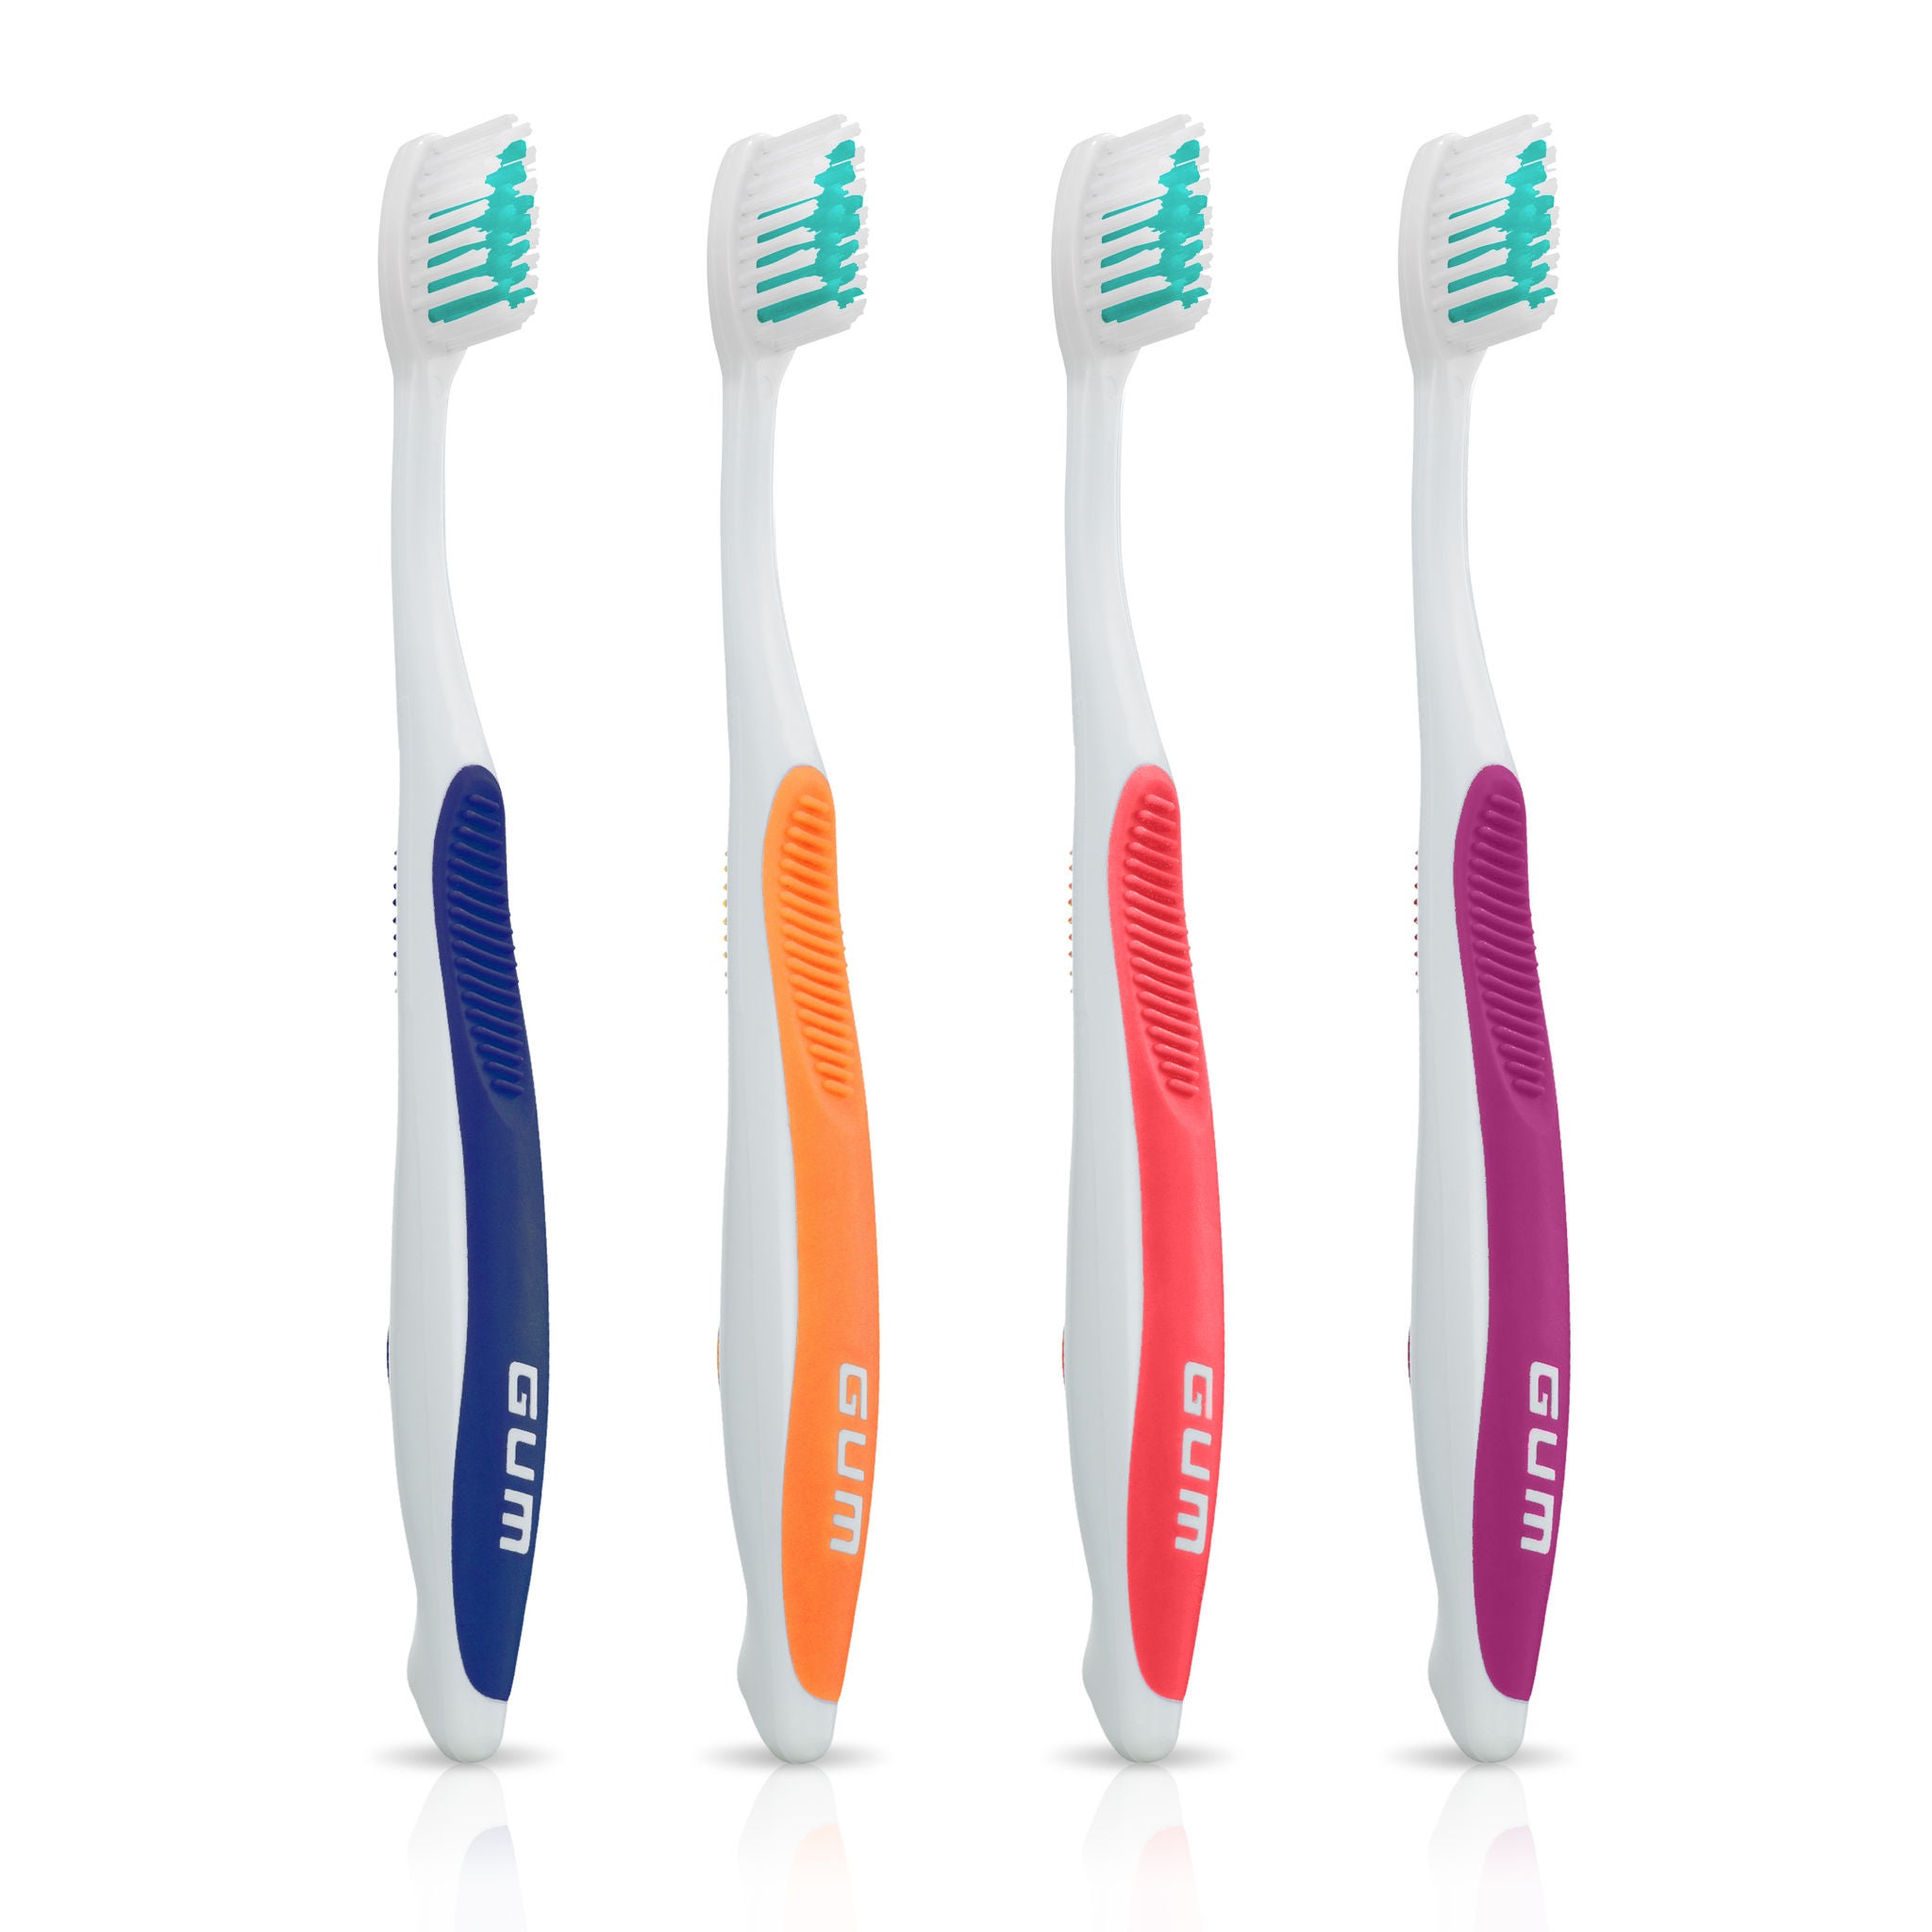 457-Product-Toothbrush-DomeTrim-Compact-Naked-4colors.jpg